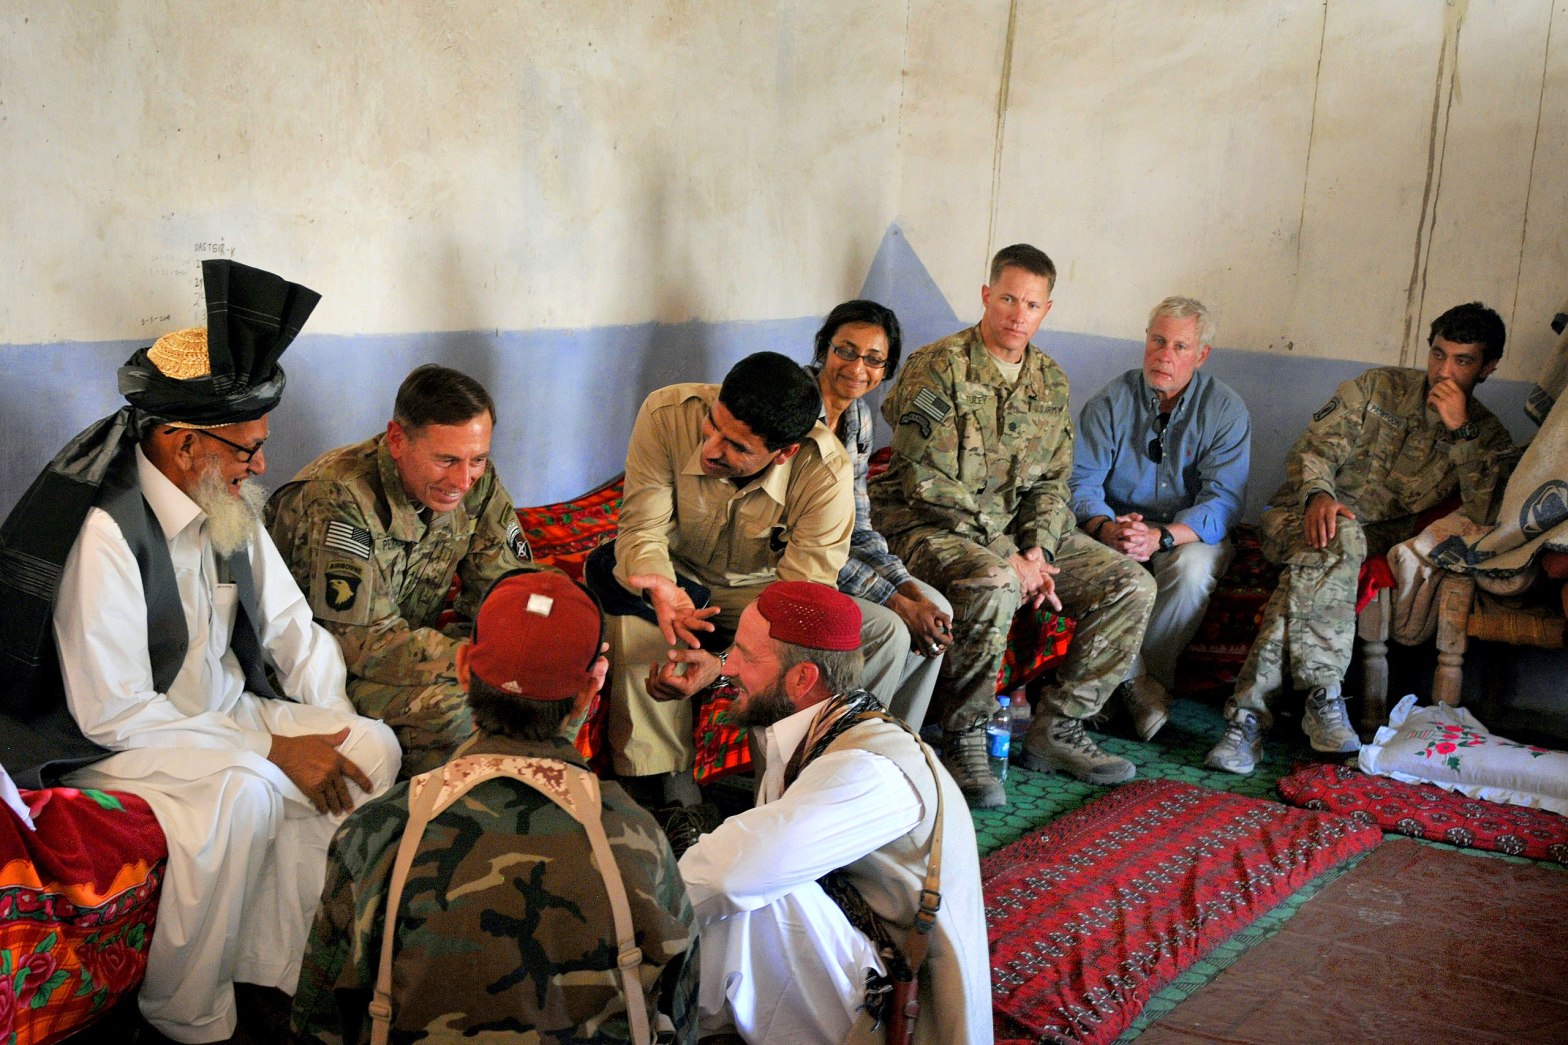 Gen. David H. Petraeus, commander of NATO and International Security Assistance Force troops in Afghanistan, visits the 1-16th Infantry 2nd Battalion at Qalat Mangwal, Afghanistan, during a battlefield circulation, May 8. ISAF, in support of the Government of the Islamic Republic of Afghanistan, conducts operations in Afghanistan to reduce the capability and will of the insurgency, support the growth in capacity and capability of the Afghan National Security Forces, and facilitate improvements in governance and socio-economic development, in order to provide a secure environment for sustainable stability that is observable to the population. (Photo by U.S. Navy Chief Petty Officer Joshua Treadwell) (Released)/Source: https://commons.wikimedia.org/wiki/File:Defense.gov_photo_essay_110508-N-SE516-040.jpg